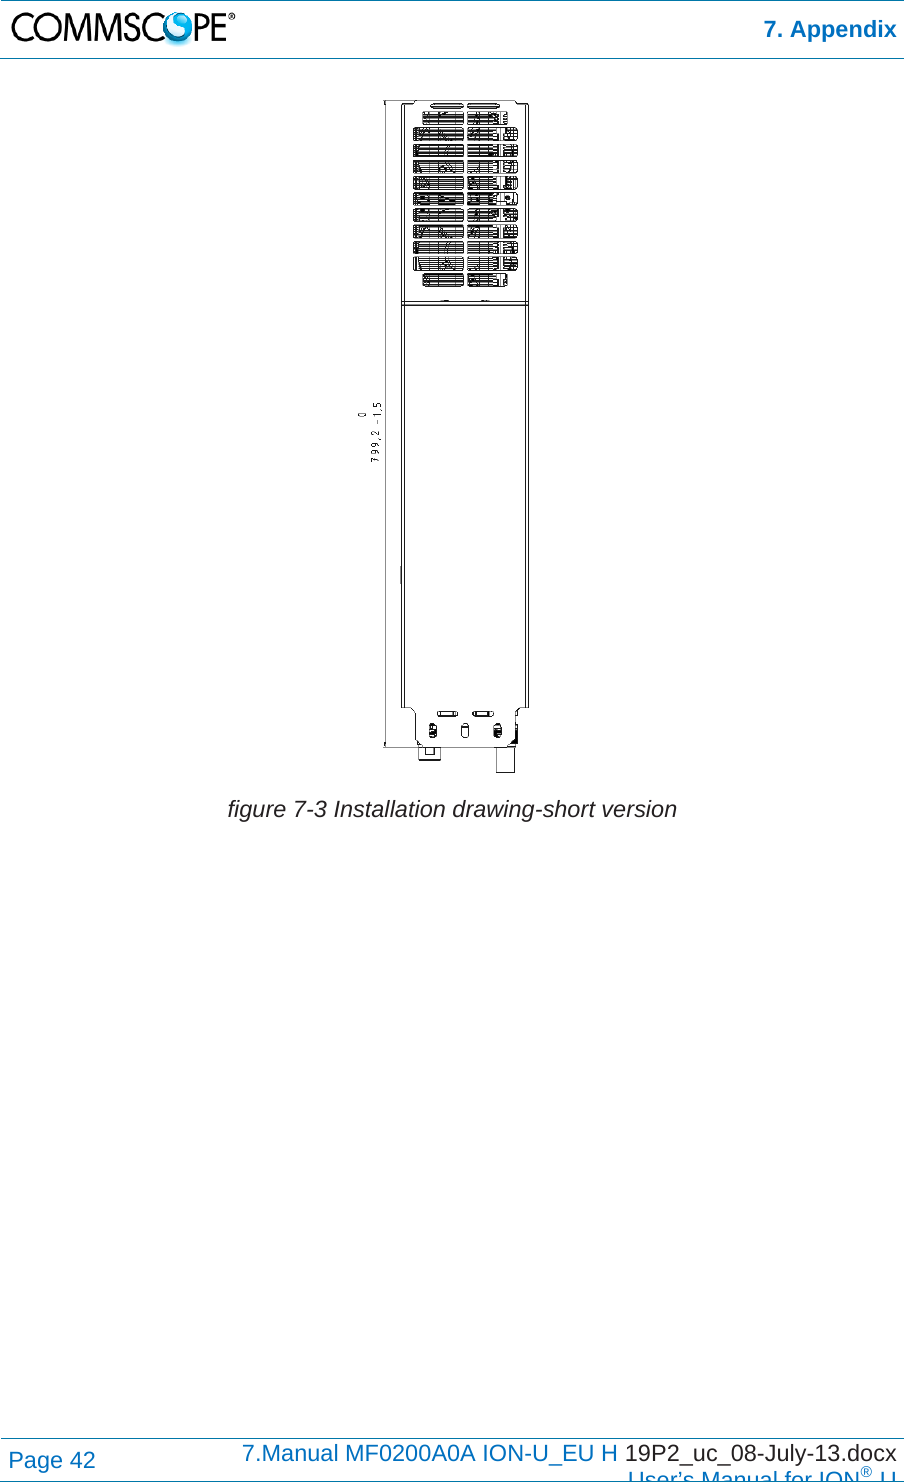  7. Appendix Page 42  7.Manual MF0200A0A ION-U_EU H 19P2_uc_08-July-13.docx  User’s Manual for ION®U  figure 7-3 Installation drawing-short version   